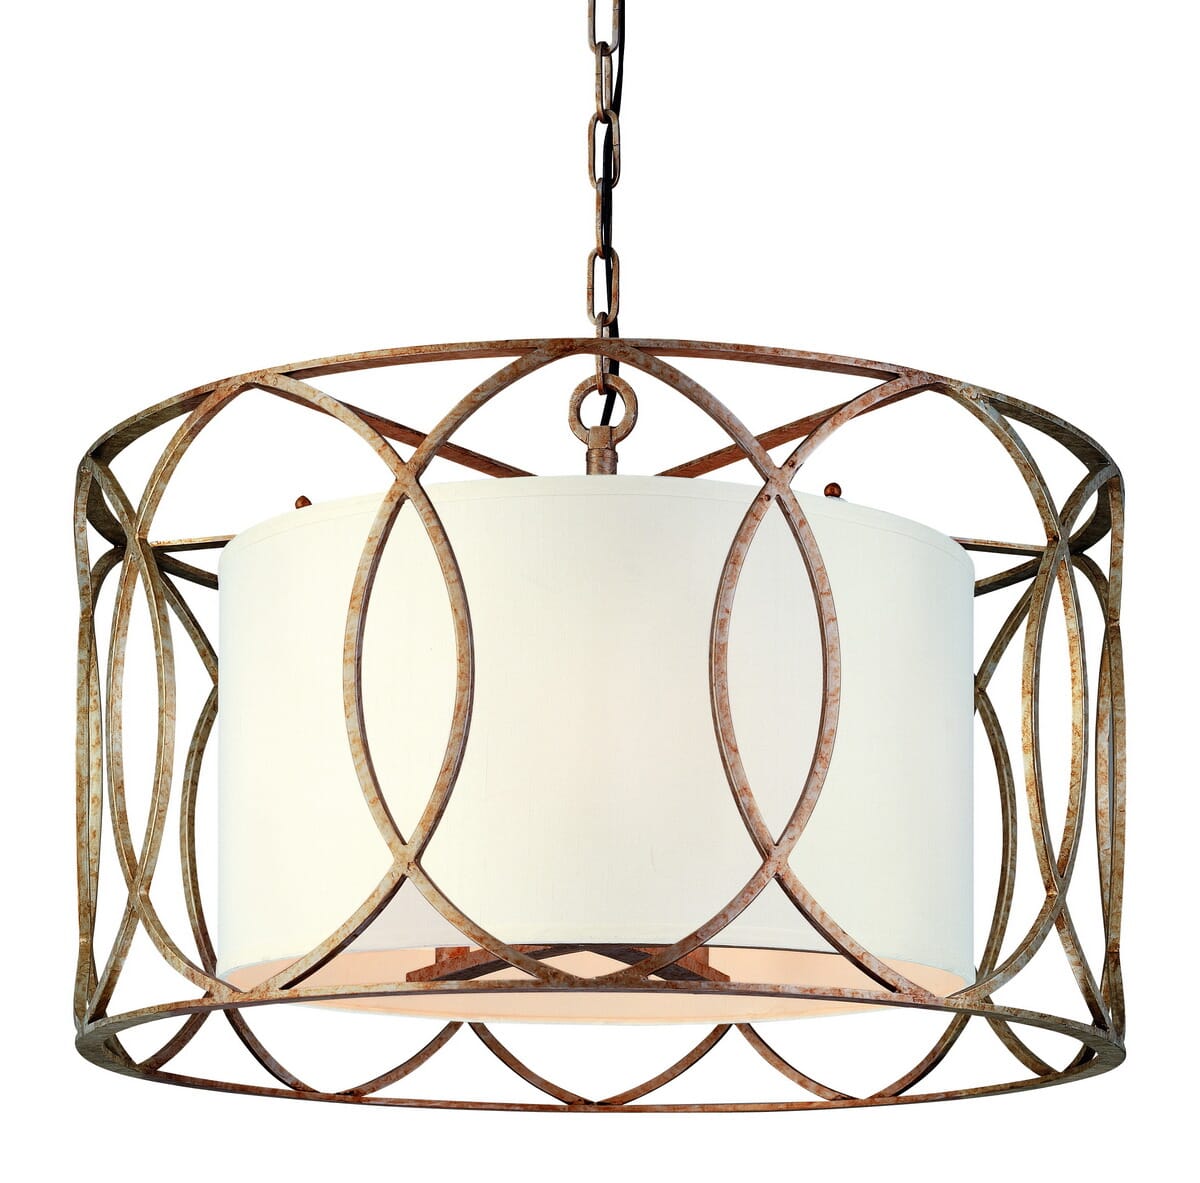 Troy Sausalito 5-Light Chandelier in Silver Gold -  Troy Lighting, F1285-SG